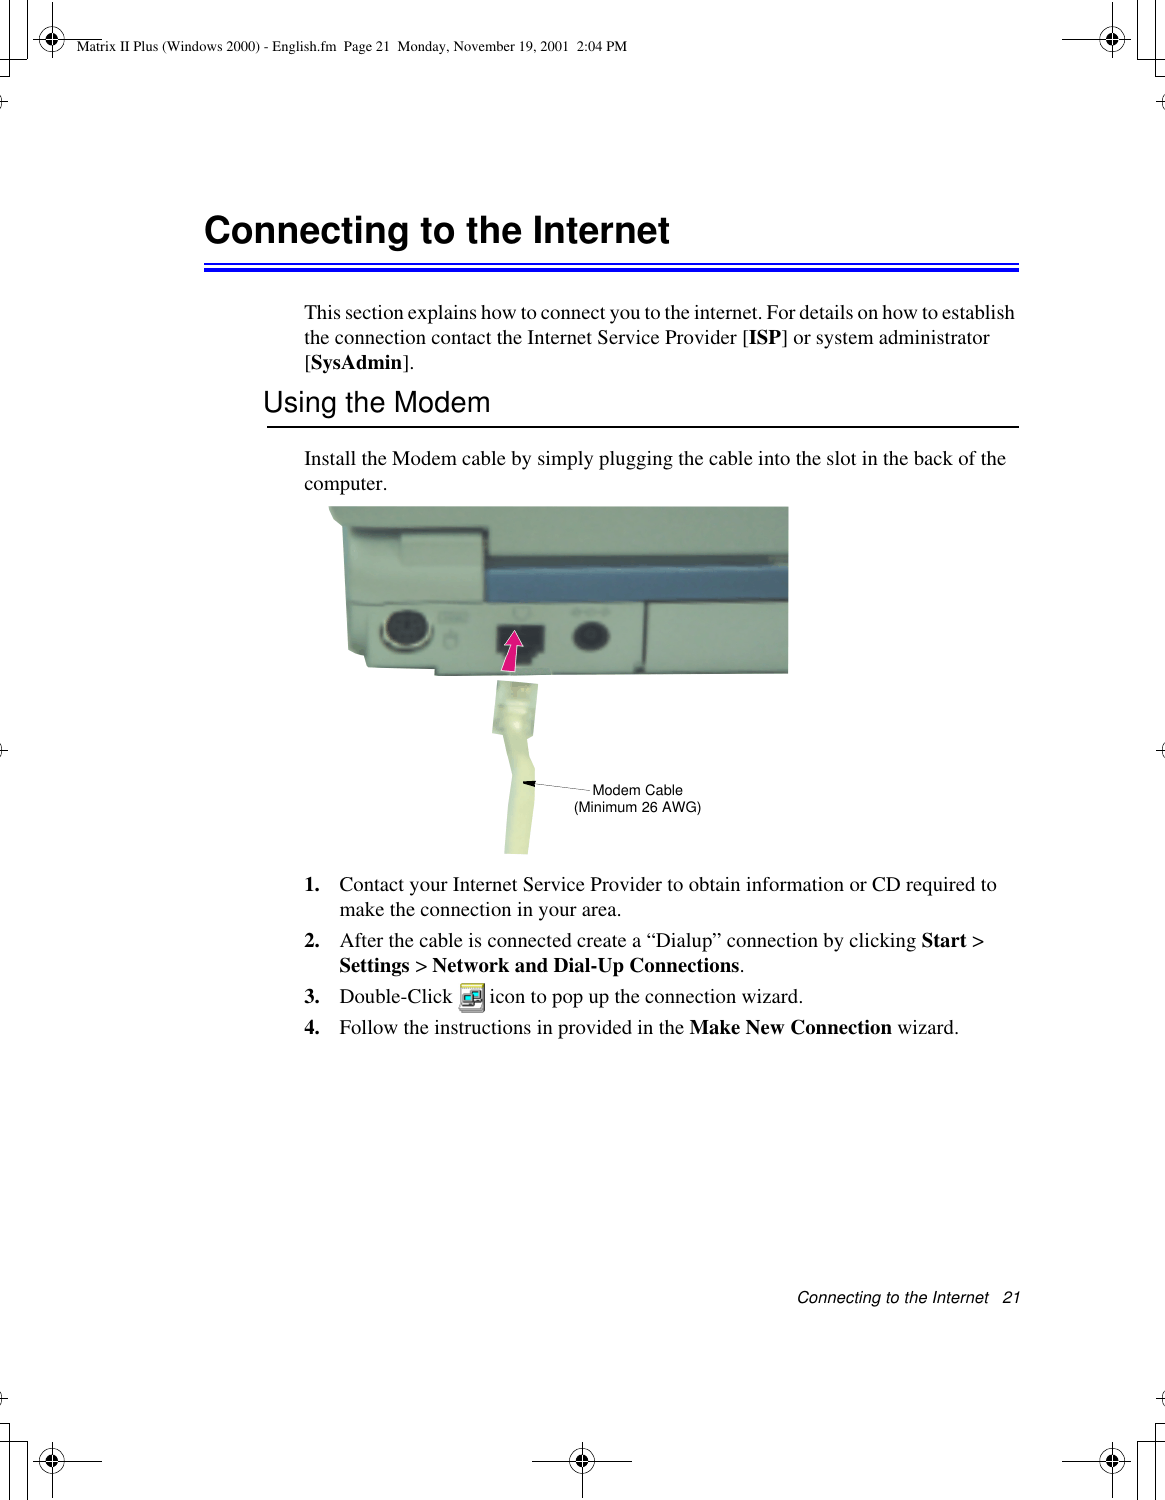 Connecting to the Internet   21Connecting to the InternetThis section explains how to connect you to the internet. For details on how to establish the connection contact the Internet Service Provider [ISP] or system administrator [SysAdmin].Using the ModemInstall the Modem cable by simply plugging the cable into the slot in the back of the computer.1. Contact your Internet Service Provider to obtain information or CD required to make the connection in your area.2. After the cable is connected create a “Dialup” connection by clicking Start &gt; Settings &gt; Network and Dial-Up Connections.3. Double-Click  icon to pop up the connection wizard.4. Follow the instructions in provided in the Make New Connection wizard.Modem Cable (Minimum 26 AWG)Matrix II Plus (Windows 2000) - English.fm  Page 21  Monday, November 19, 2001  2:04 PM